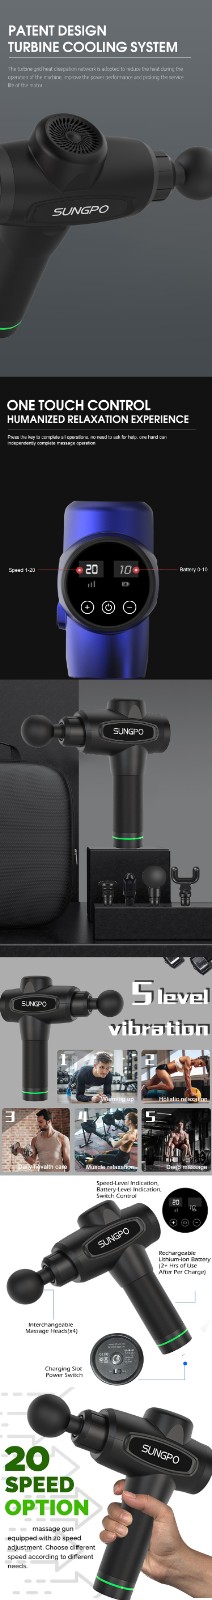 SUNGPO smart massage gun with good price for exercise-1